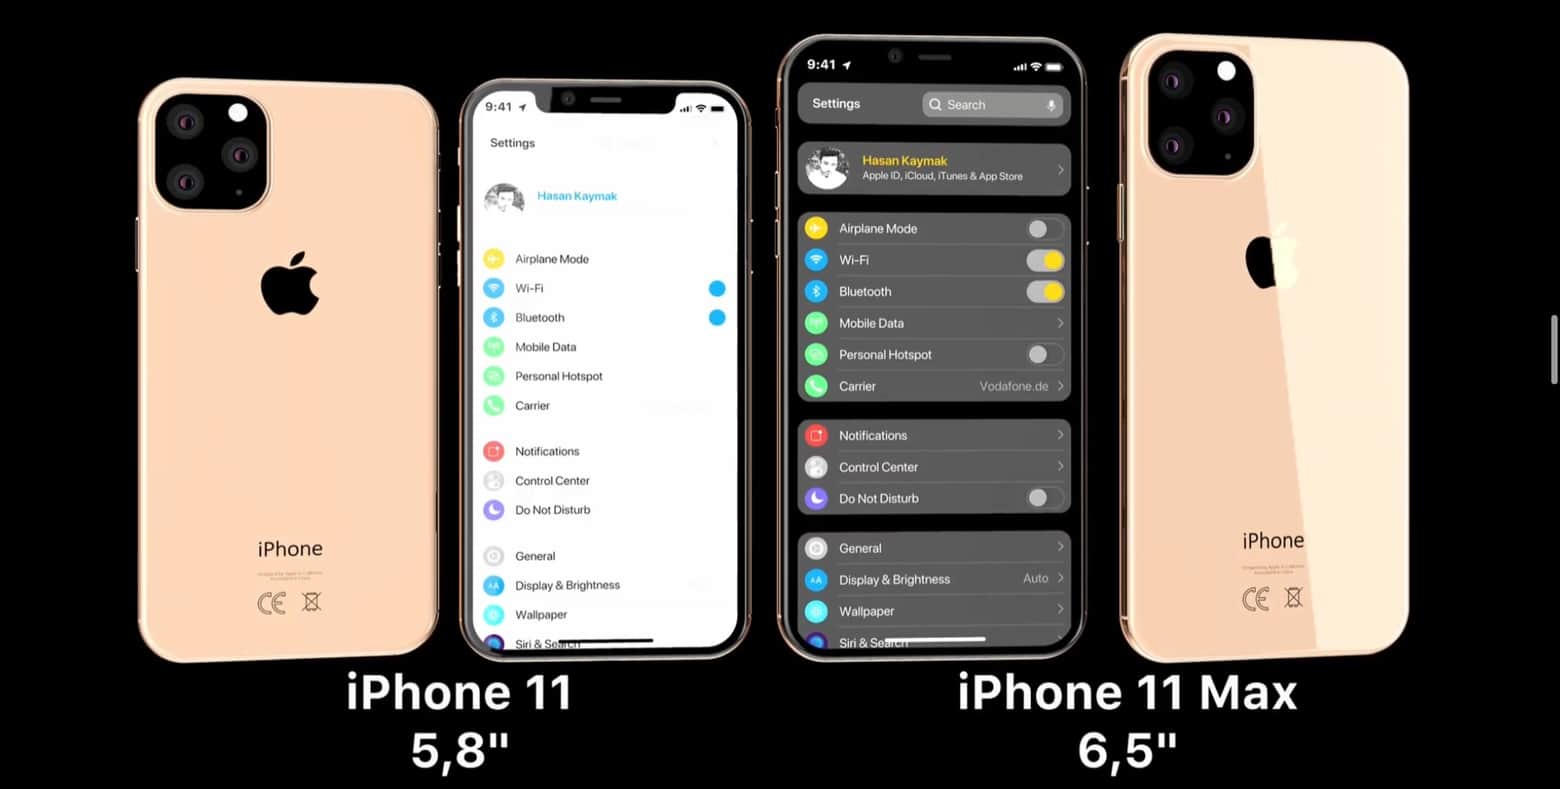 iPhone 11 and iPhone 11 Max rumors video